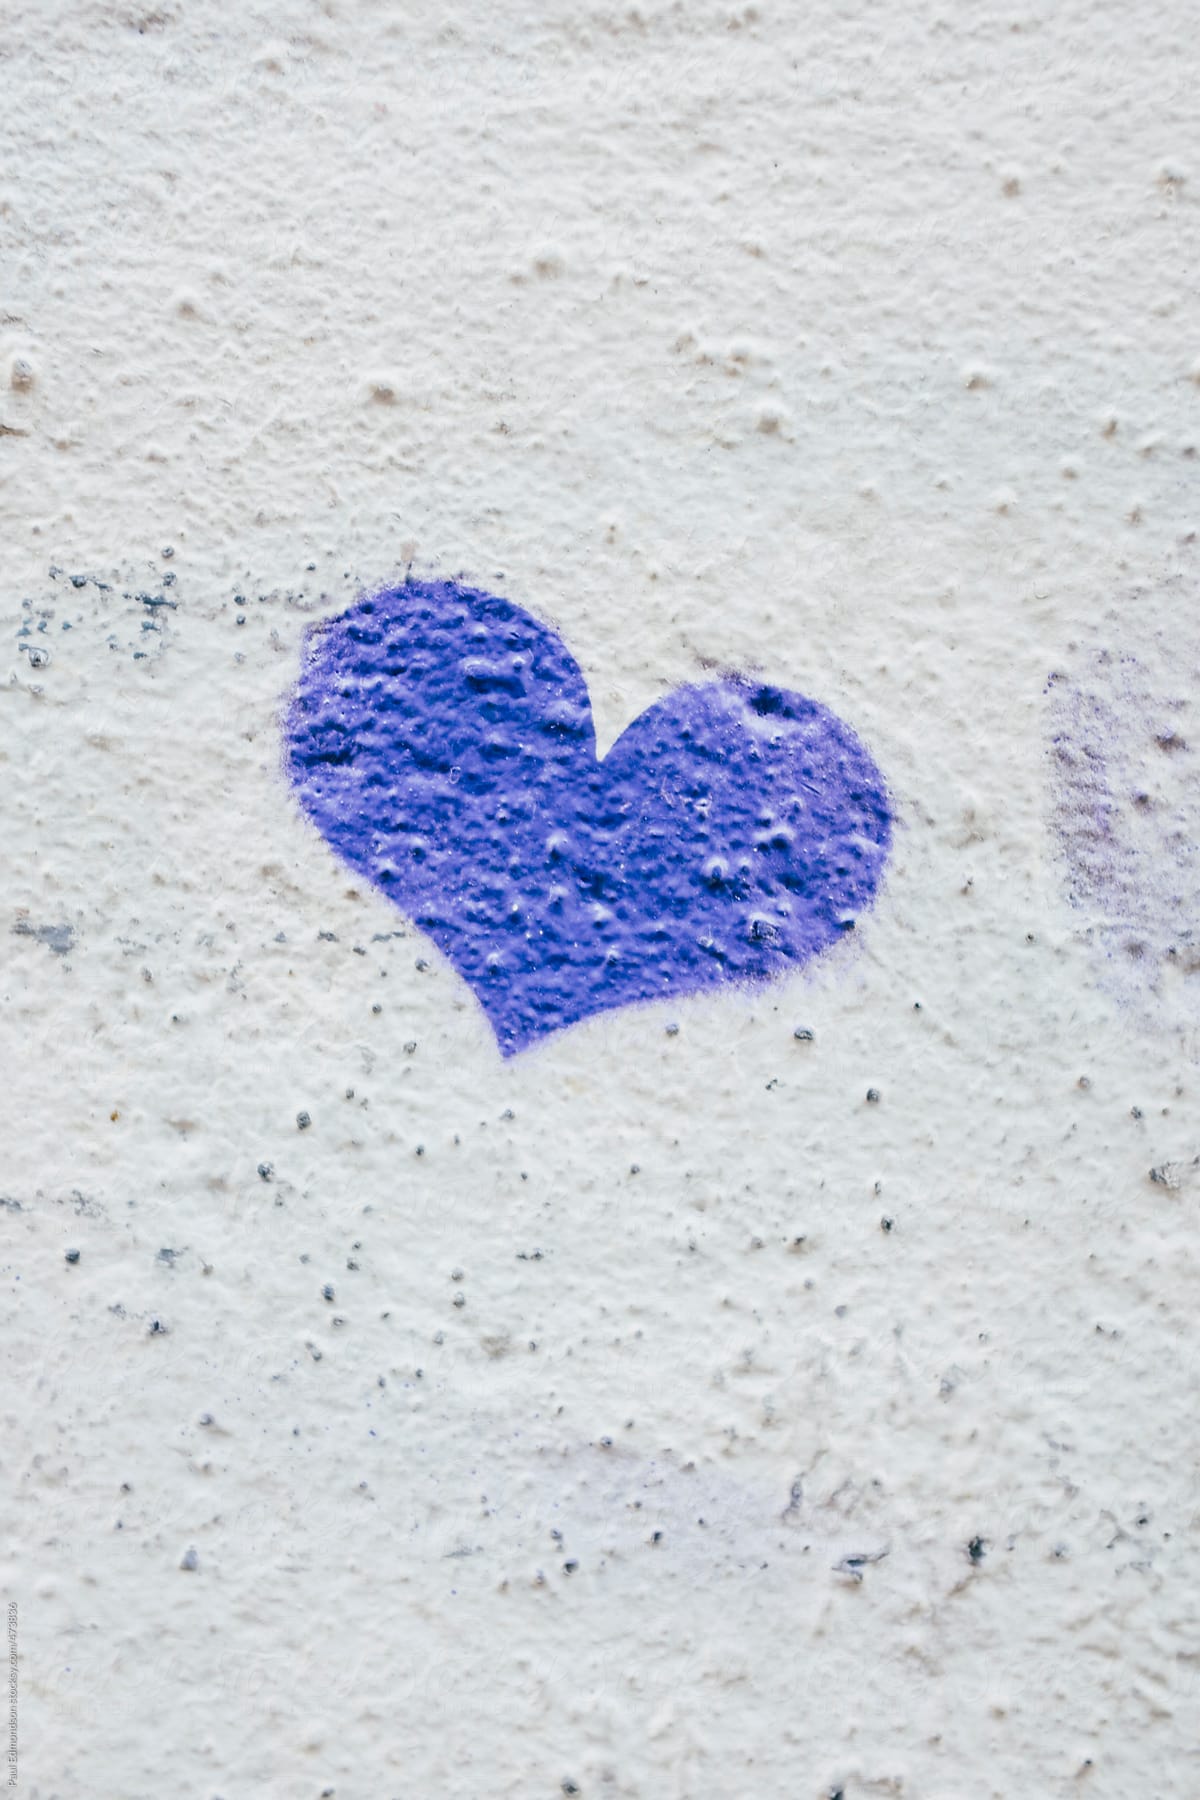 Small heart shape spray painted onto building wall, close up